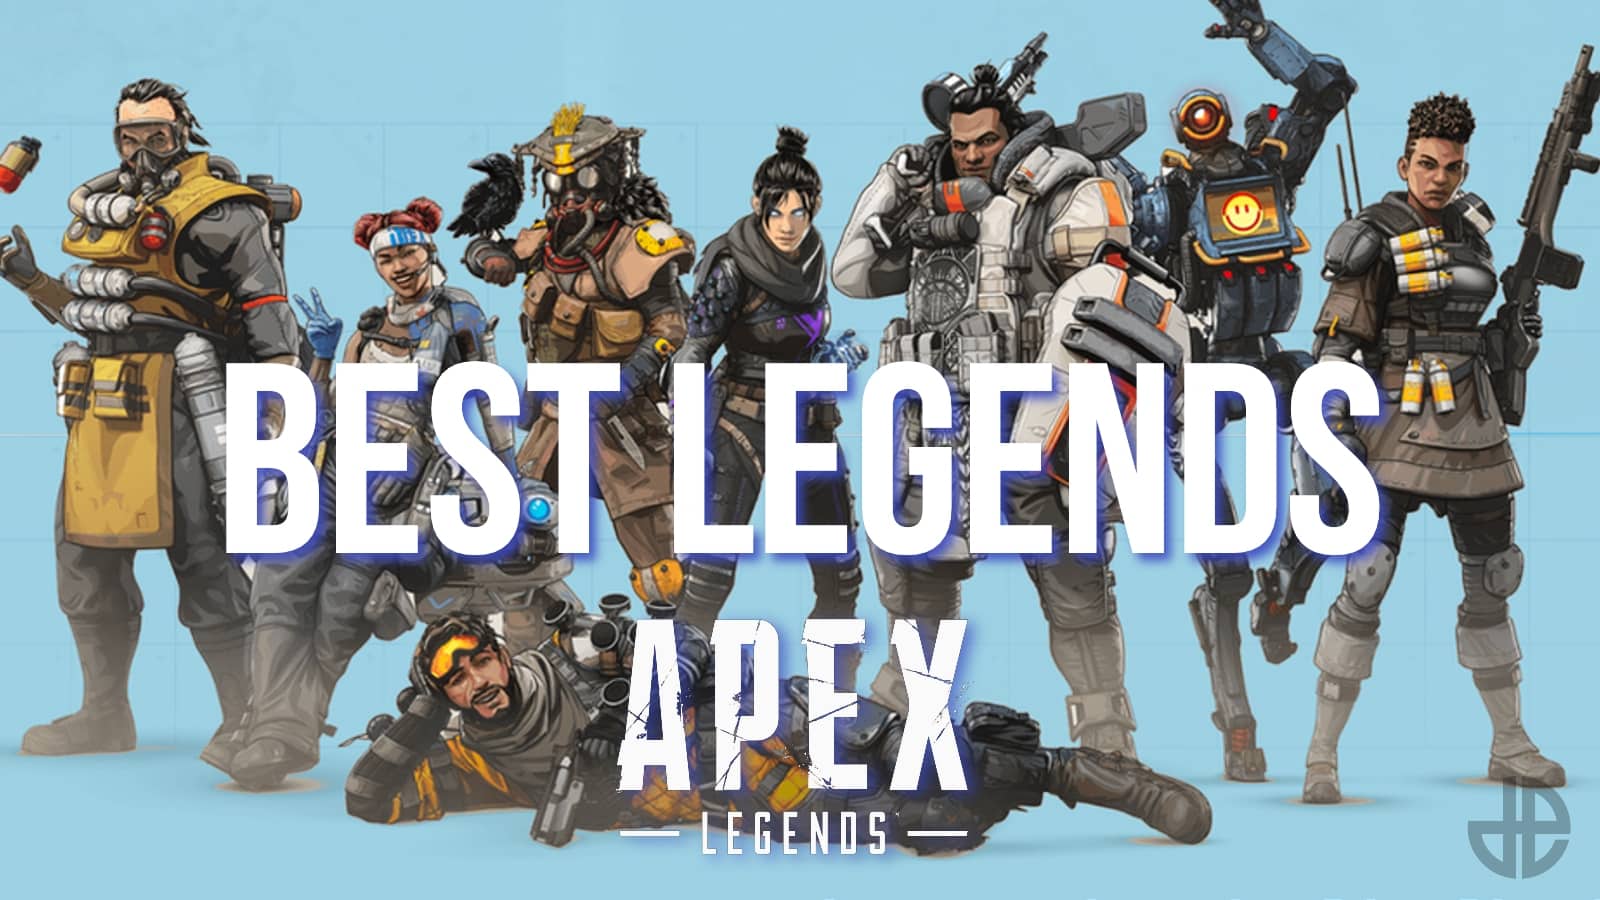 Apex Legends Ranked Guide - 5 Tips for Improving in Season 8 Ranked